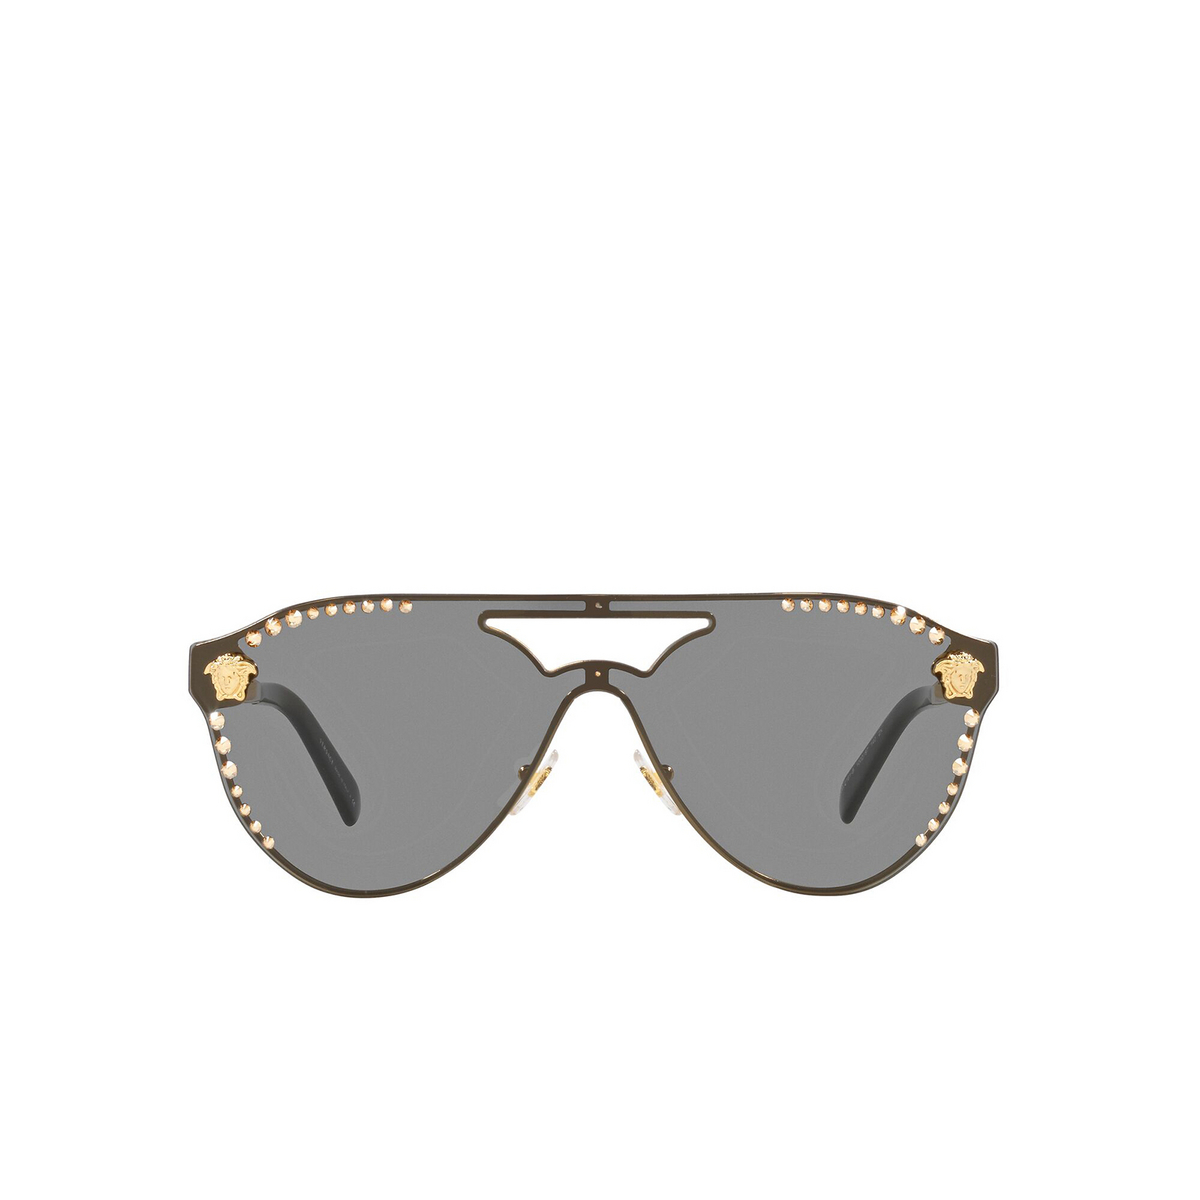 Versace® Round Sunglasses: VE2161B color Gold 100287 - front view.